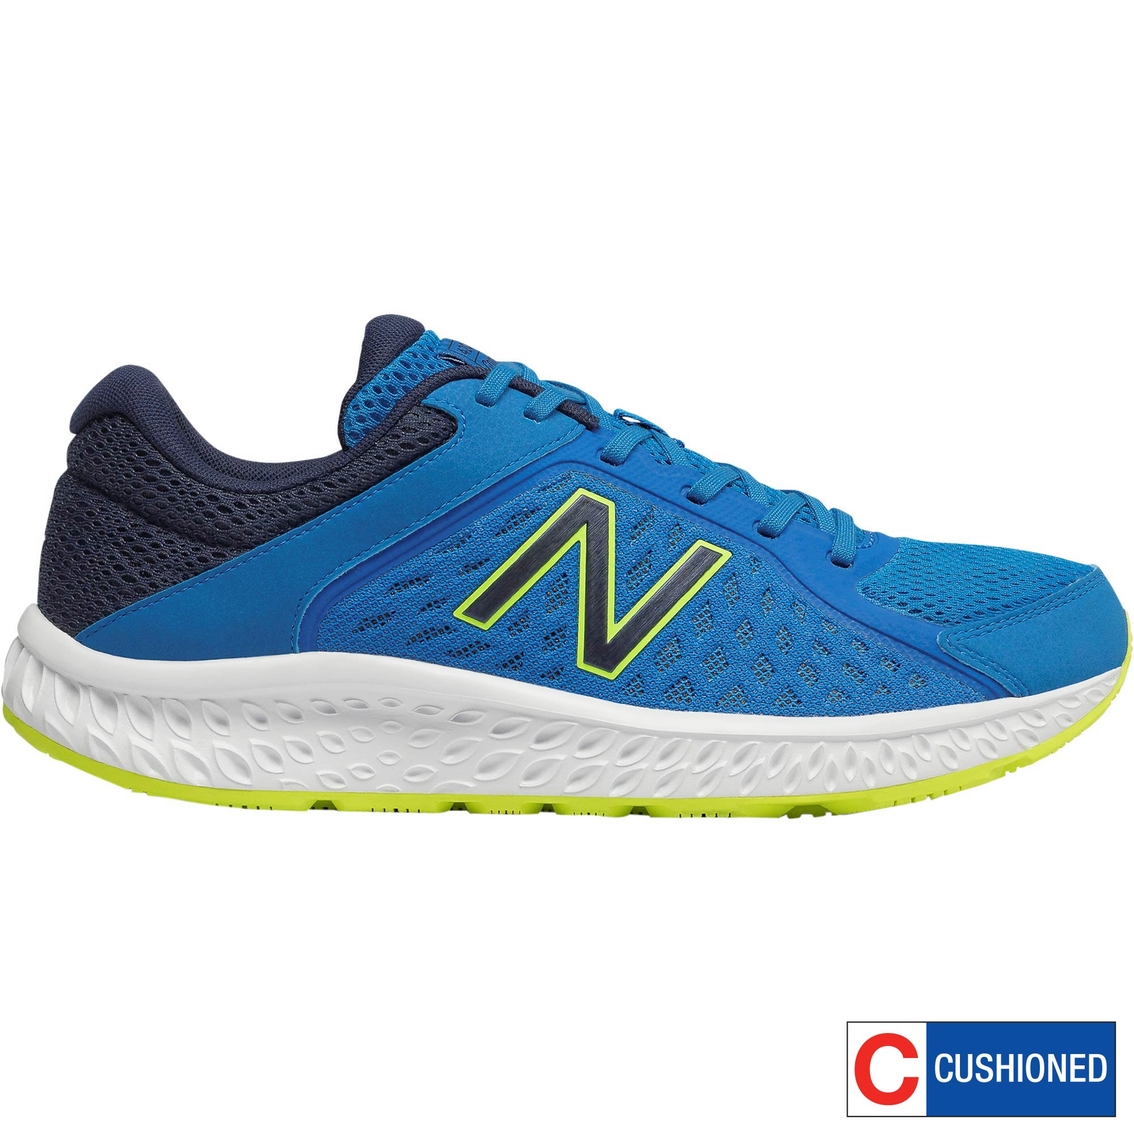 cushioned running shoes new balance